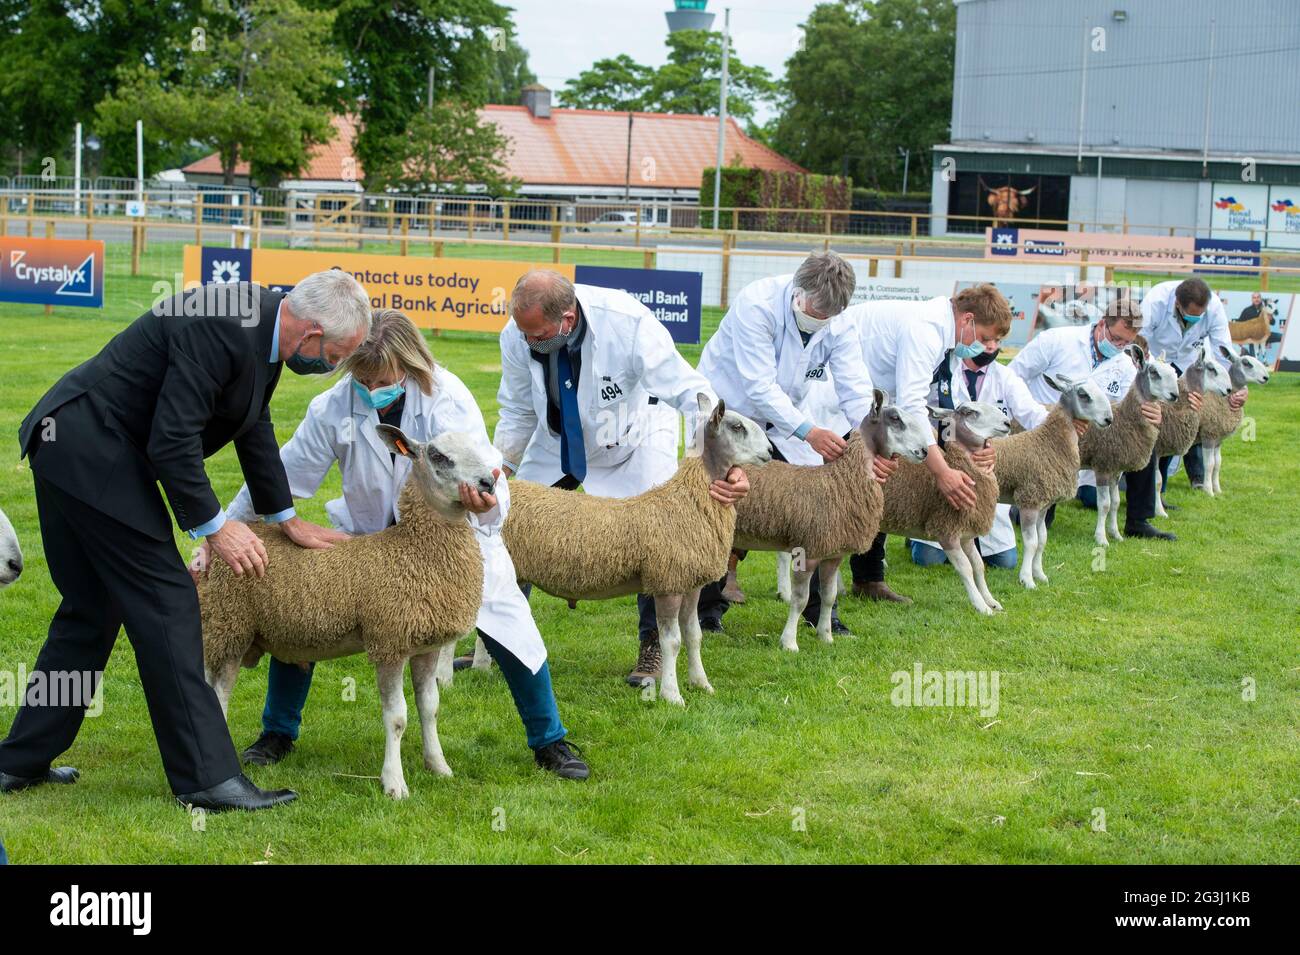 Ingliston, Edinburgh. Sheep judging at the 2021 Royal Highland Showcase agricultural show which was streamed online due to the Coronavirus Pandemic. Stock Photo